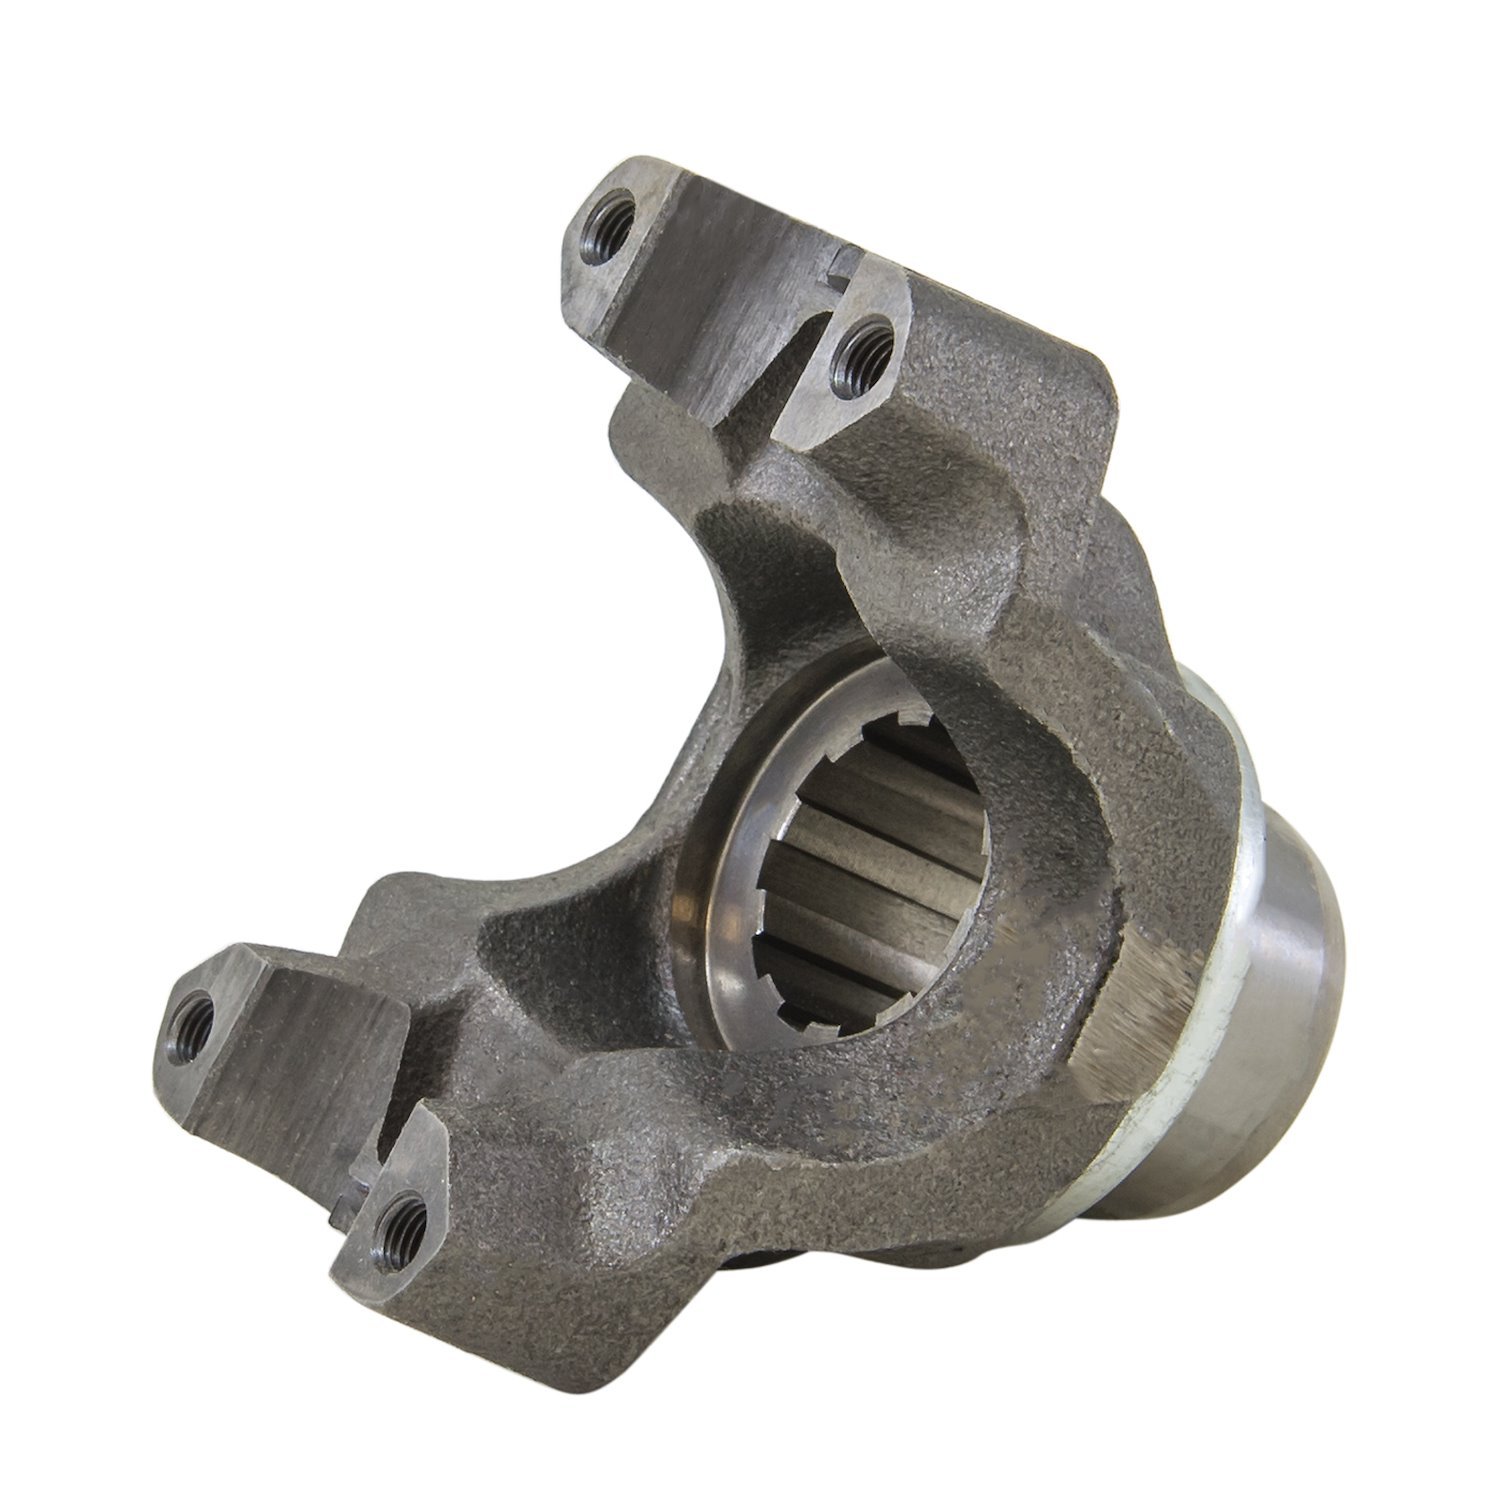 Replacement Yoke For Dana 44 With 10 Spline And A 1310 U/Joint Size